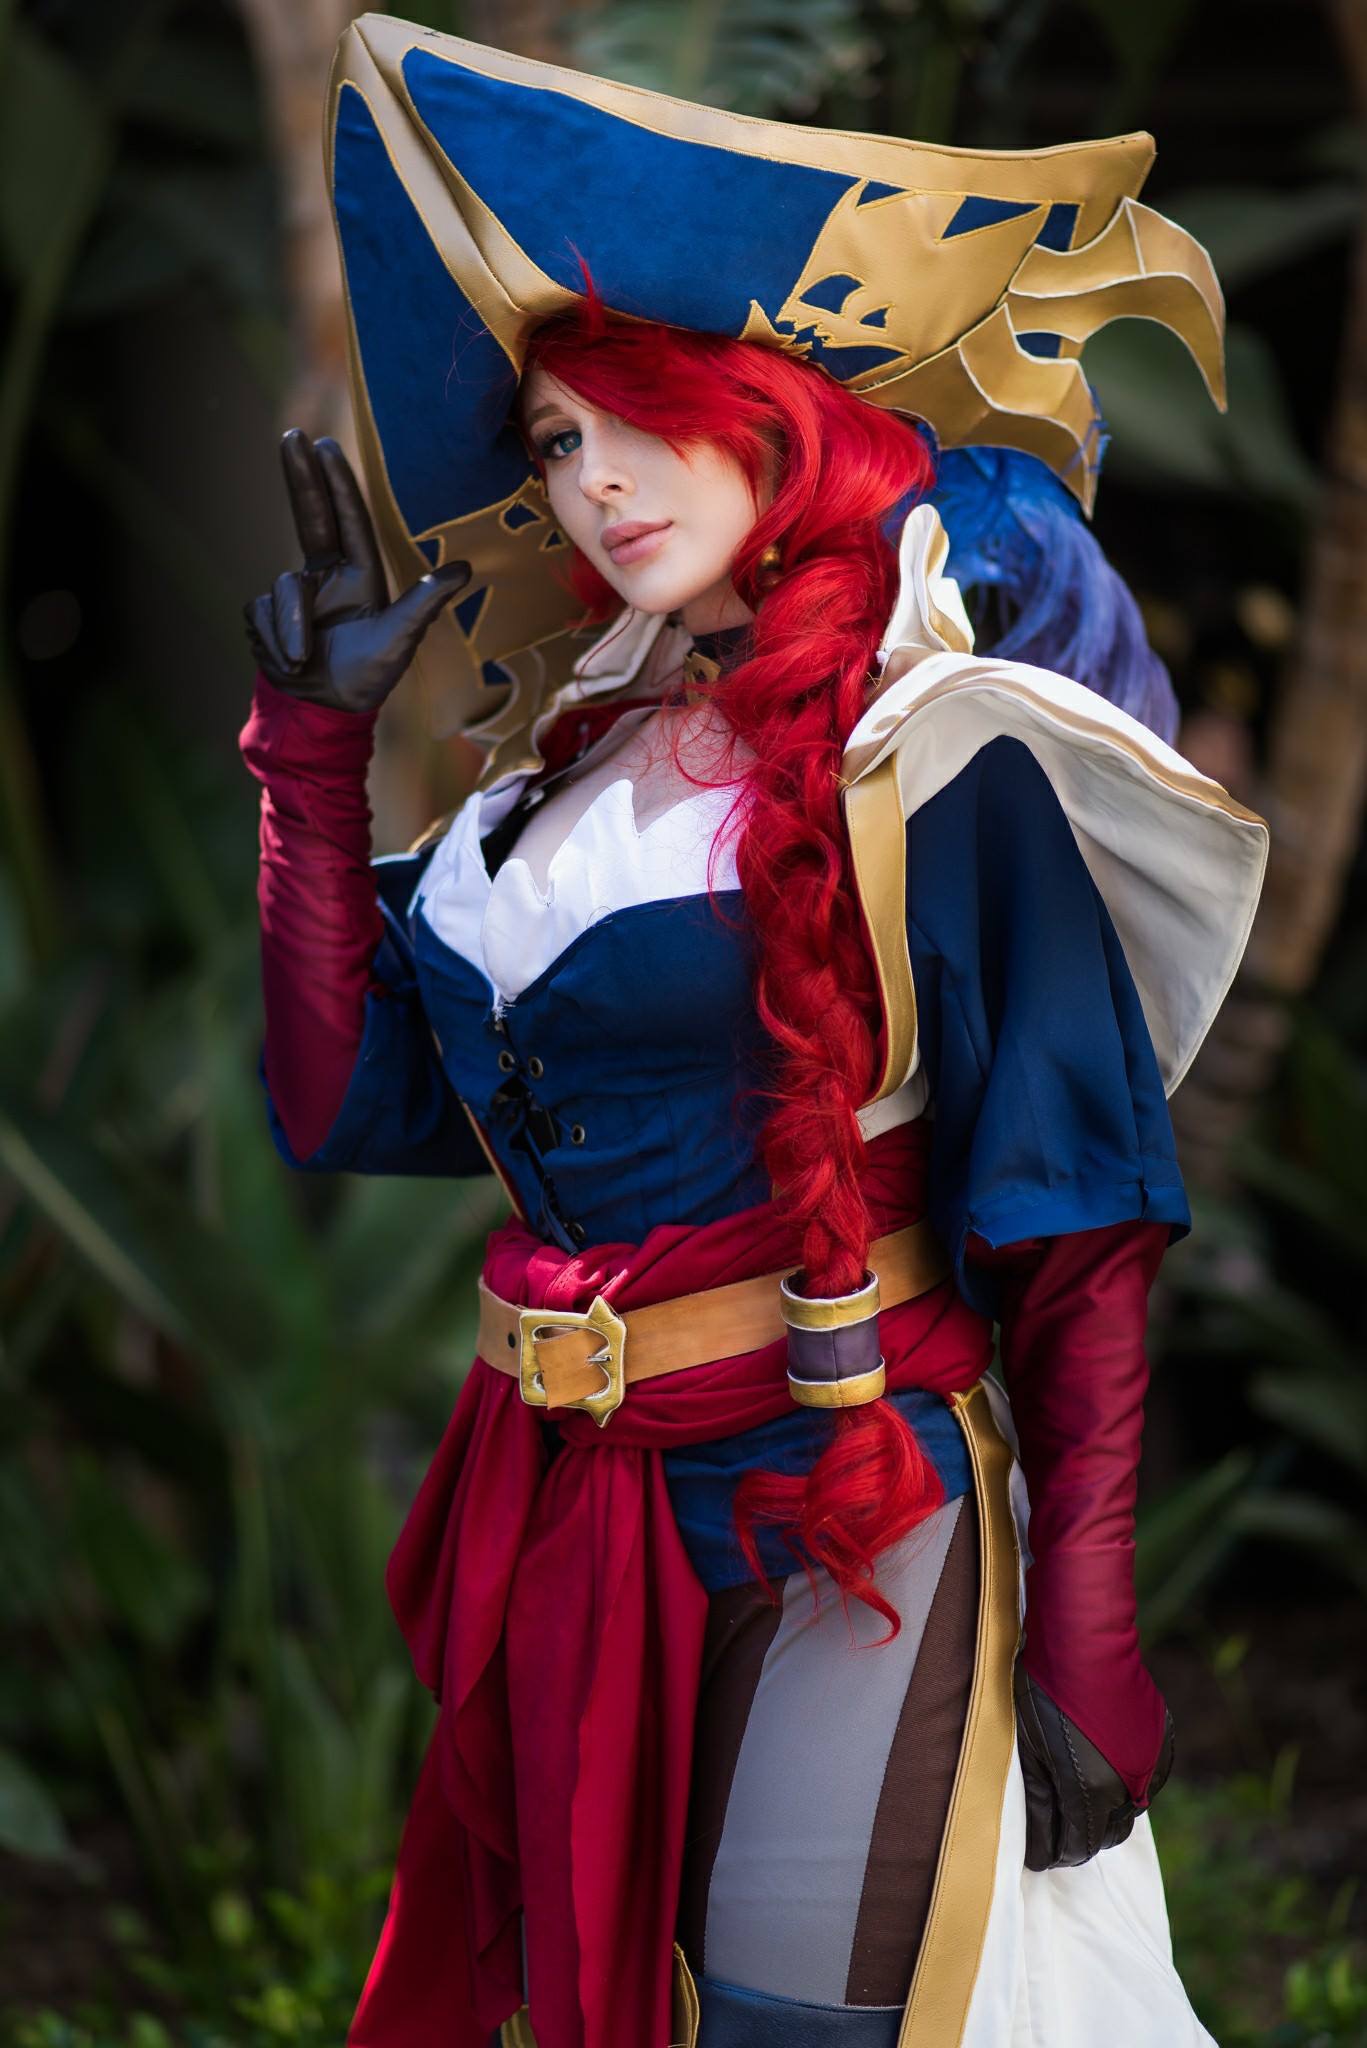 Women Redhead Cosplay Miss Fortune Miss Fortune League Of Legends League Of Legends 1367x2048